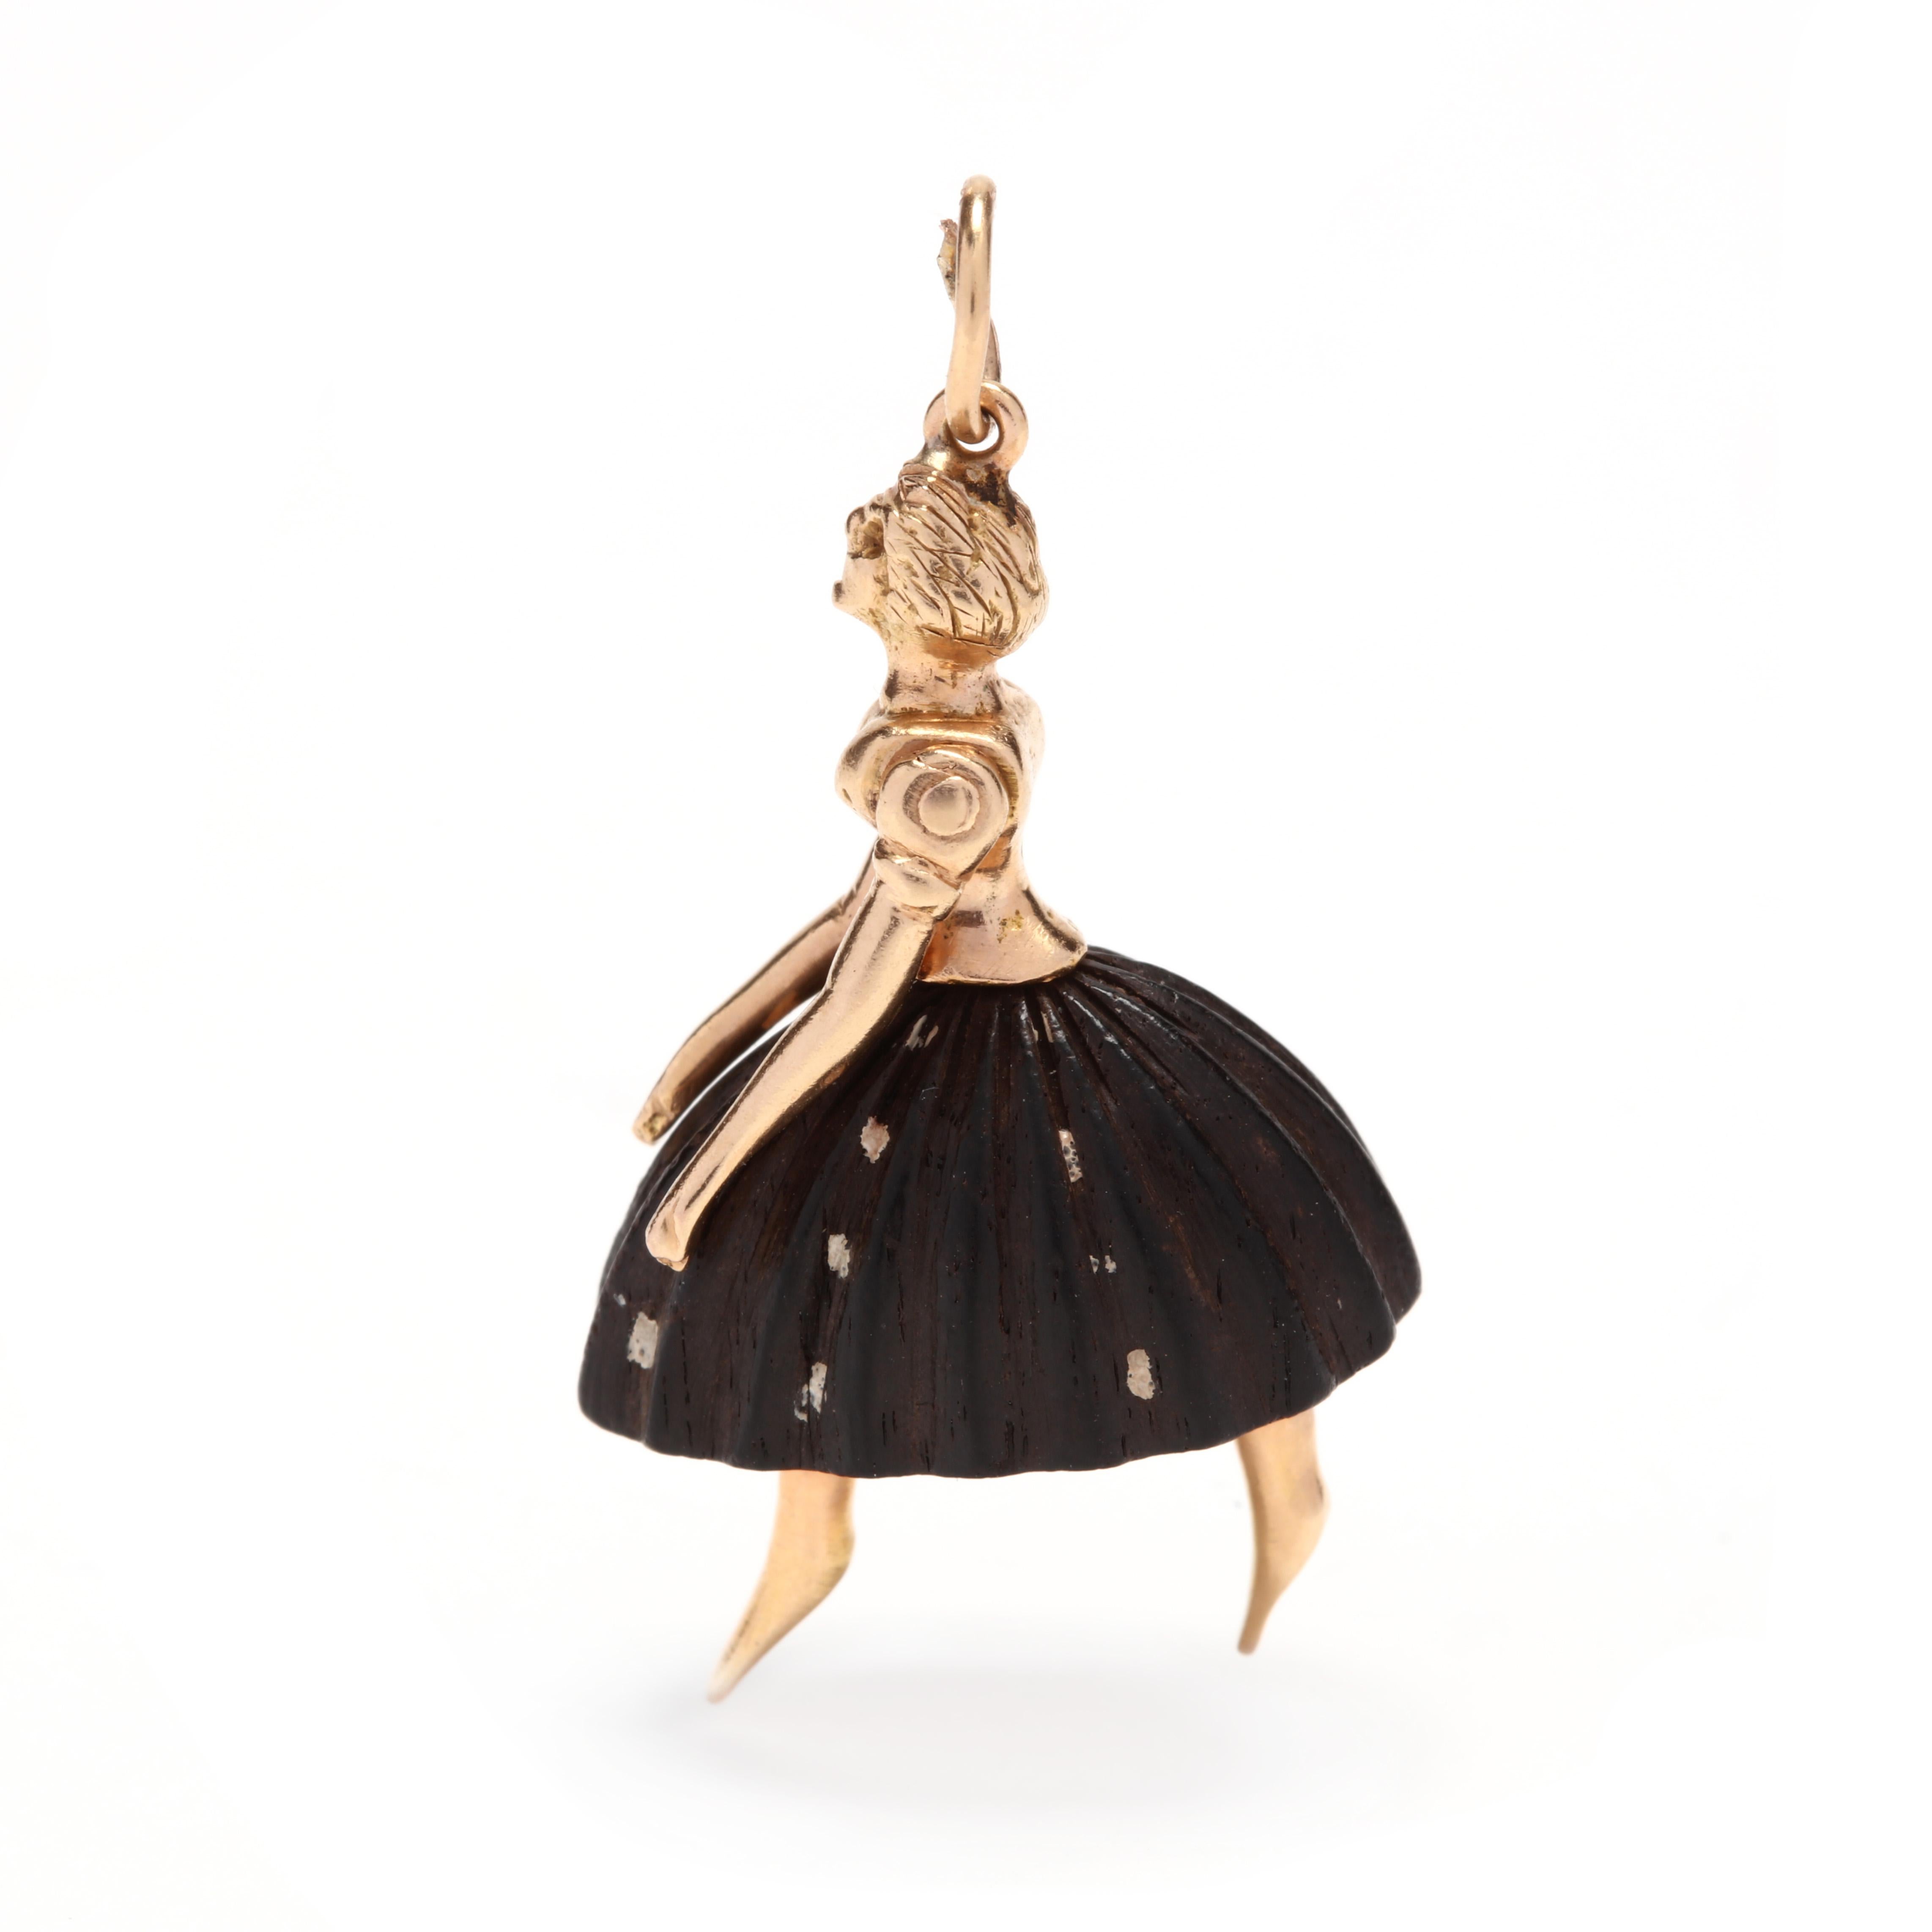 An 18 karat yellow  gold and carved wood ballerina charm / pendant. This pendant features a female ballerina motif with a carved wooden skirt and articulated arms.

Length: 1 3/8 in.

Width: 3/4 in.

3.58 dwts.

* Please note that this is a vintage